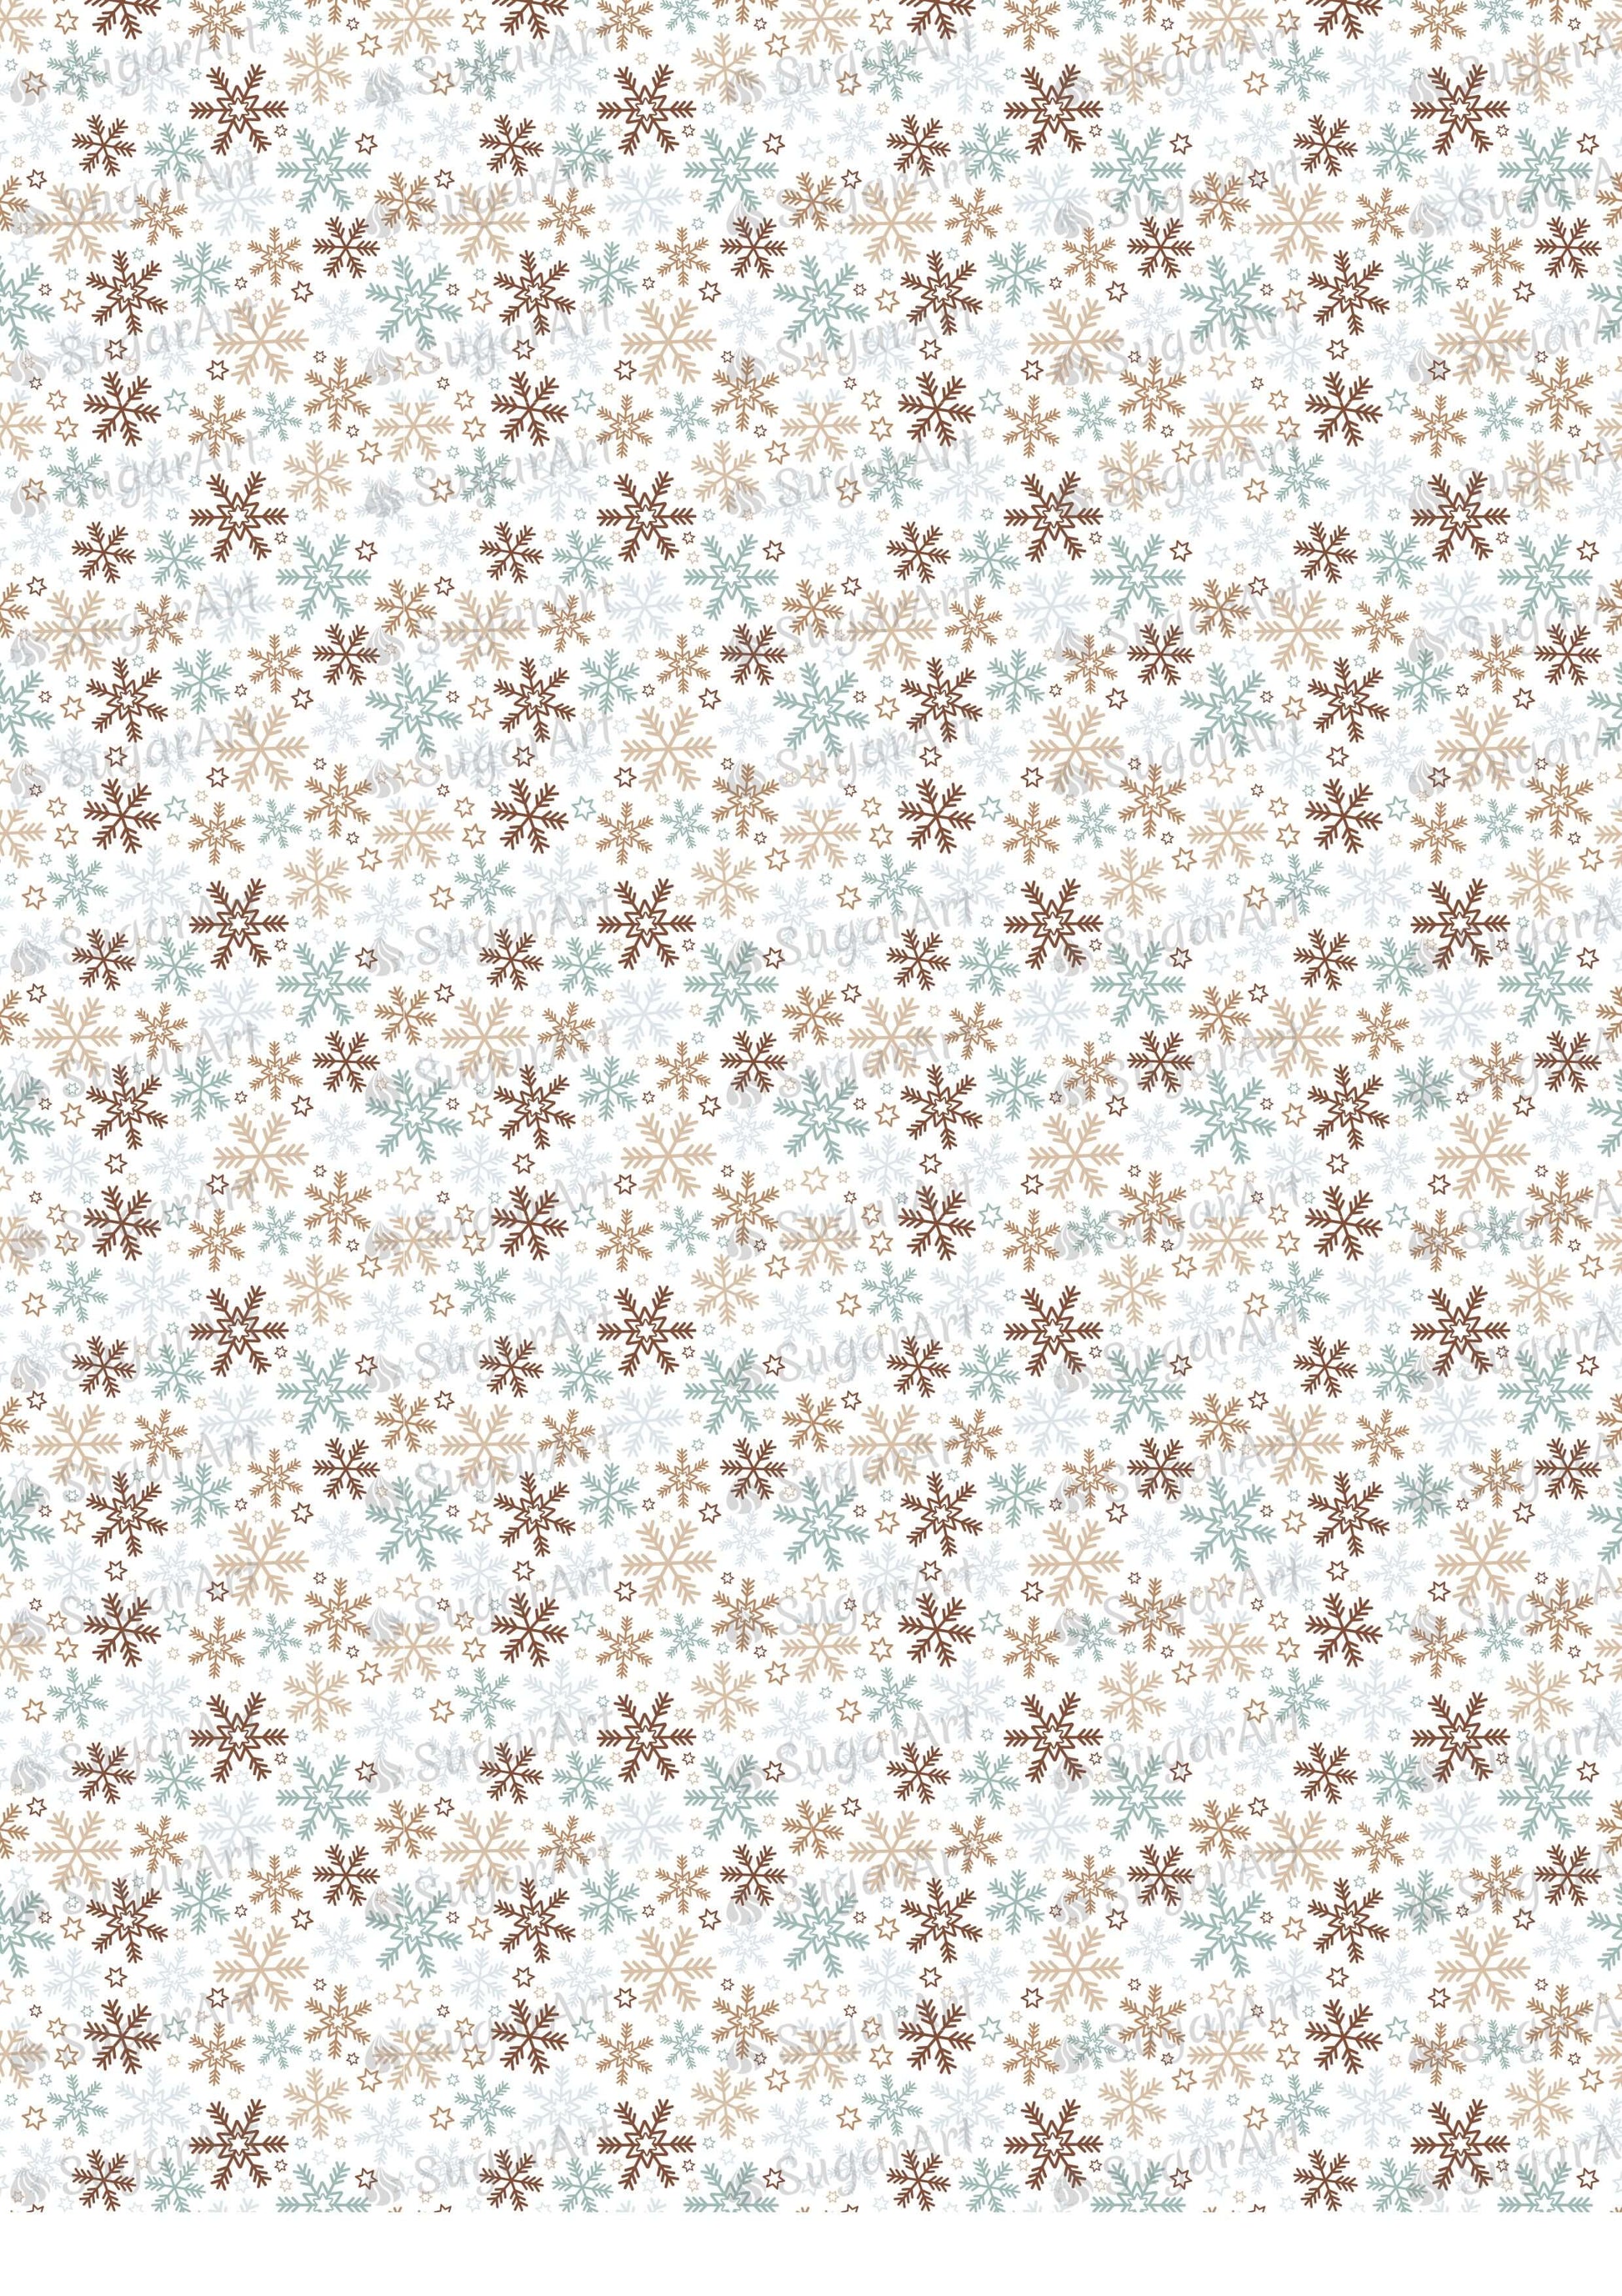 Gold and Silver Snowflakes and Stars - BSA037.